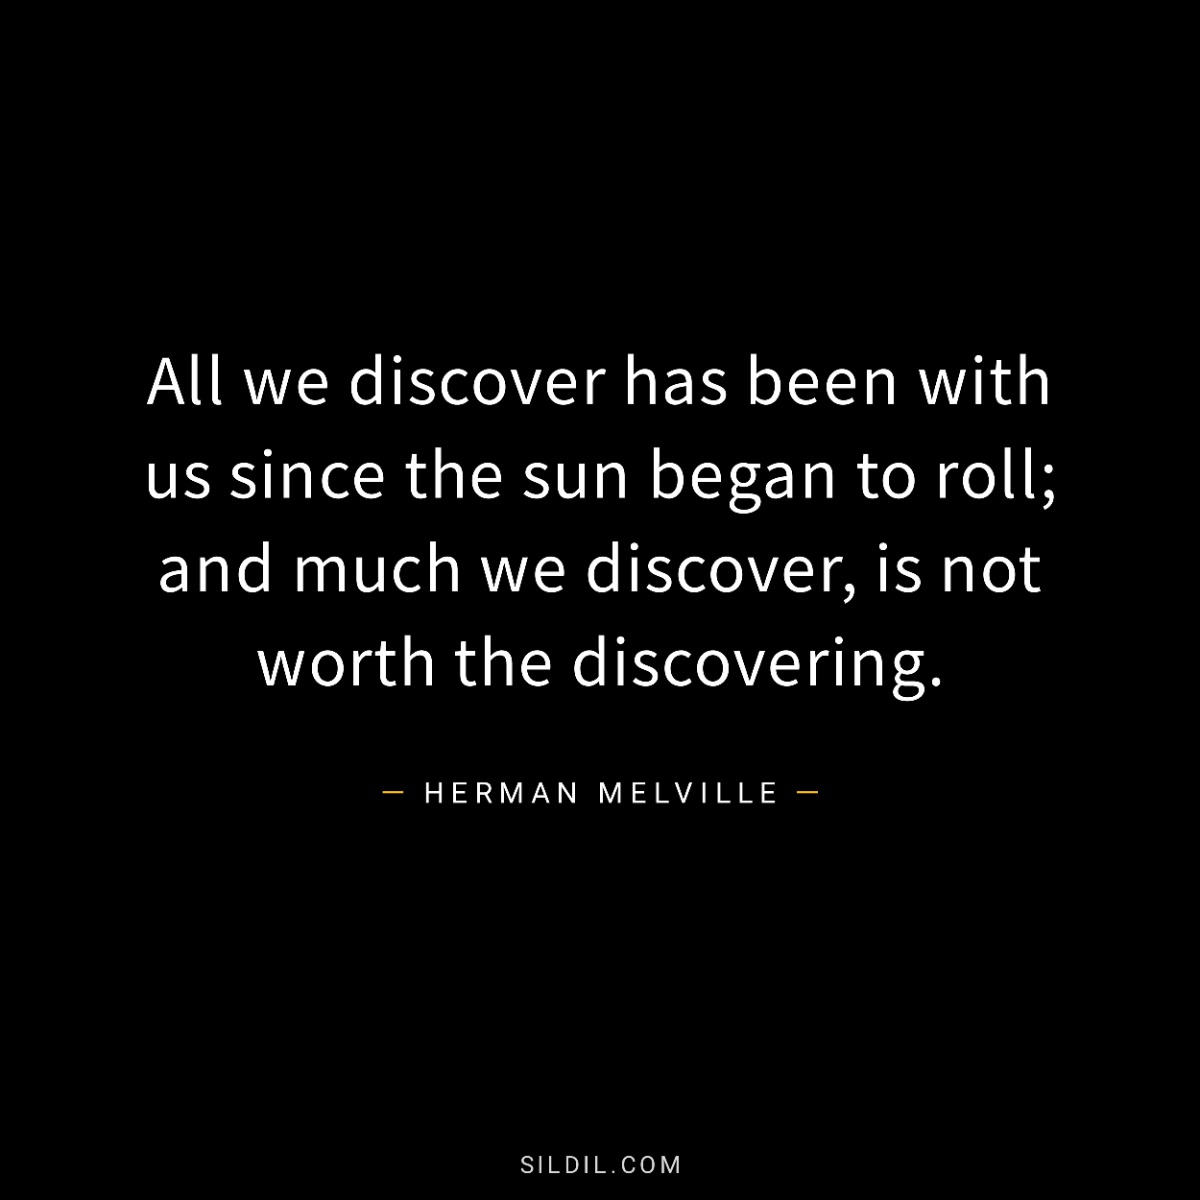 All we discover has been with us since the sun began to roll; and much we discover, is not worth the discovering.